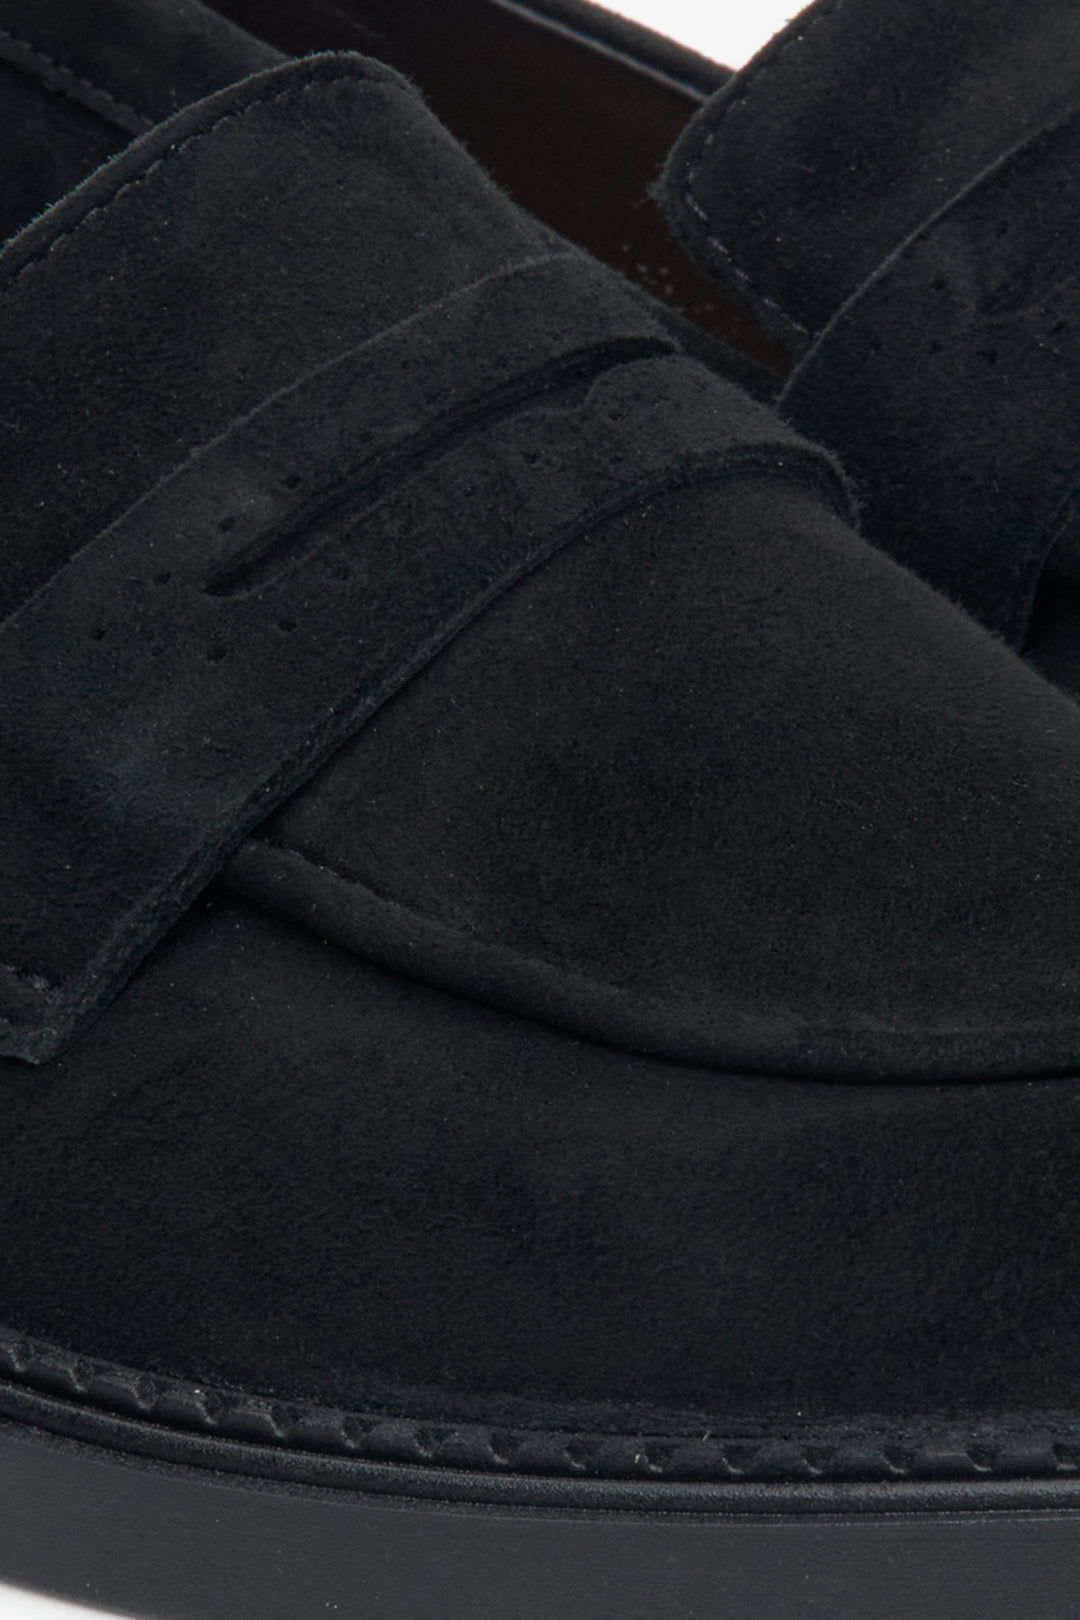 Black women's loafers by Estro - a close-up on the sewing line.